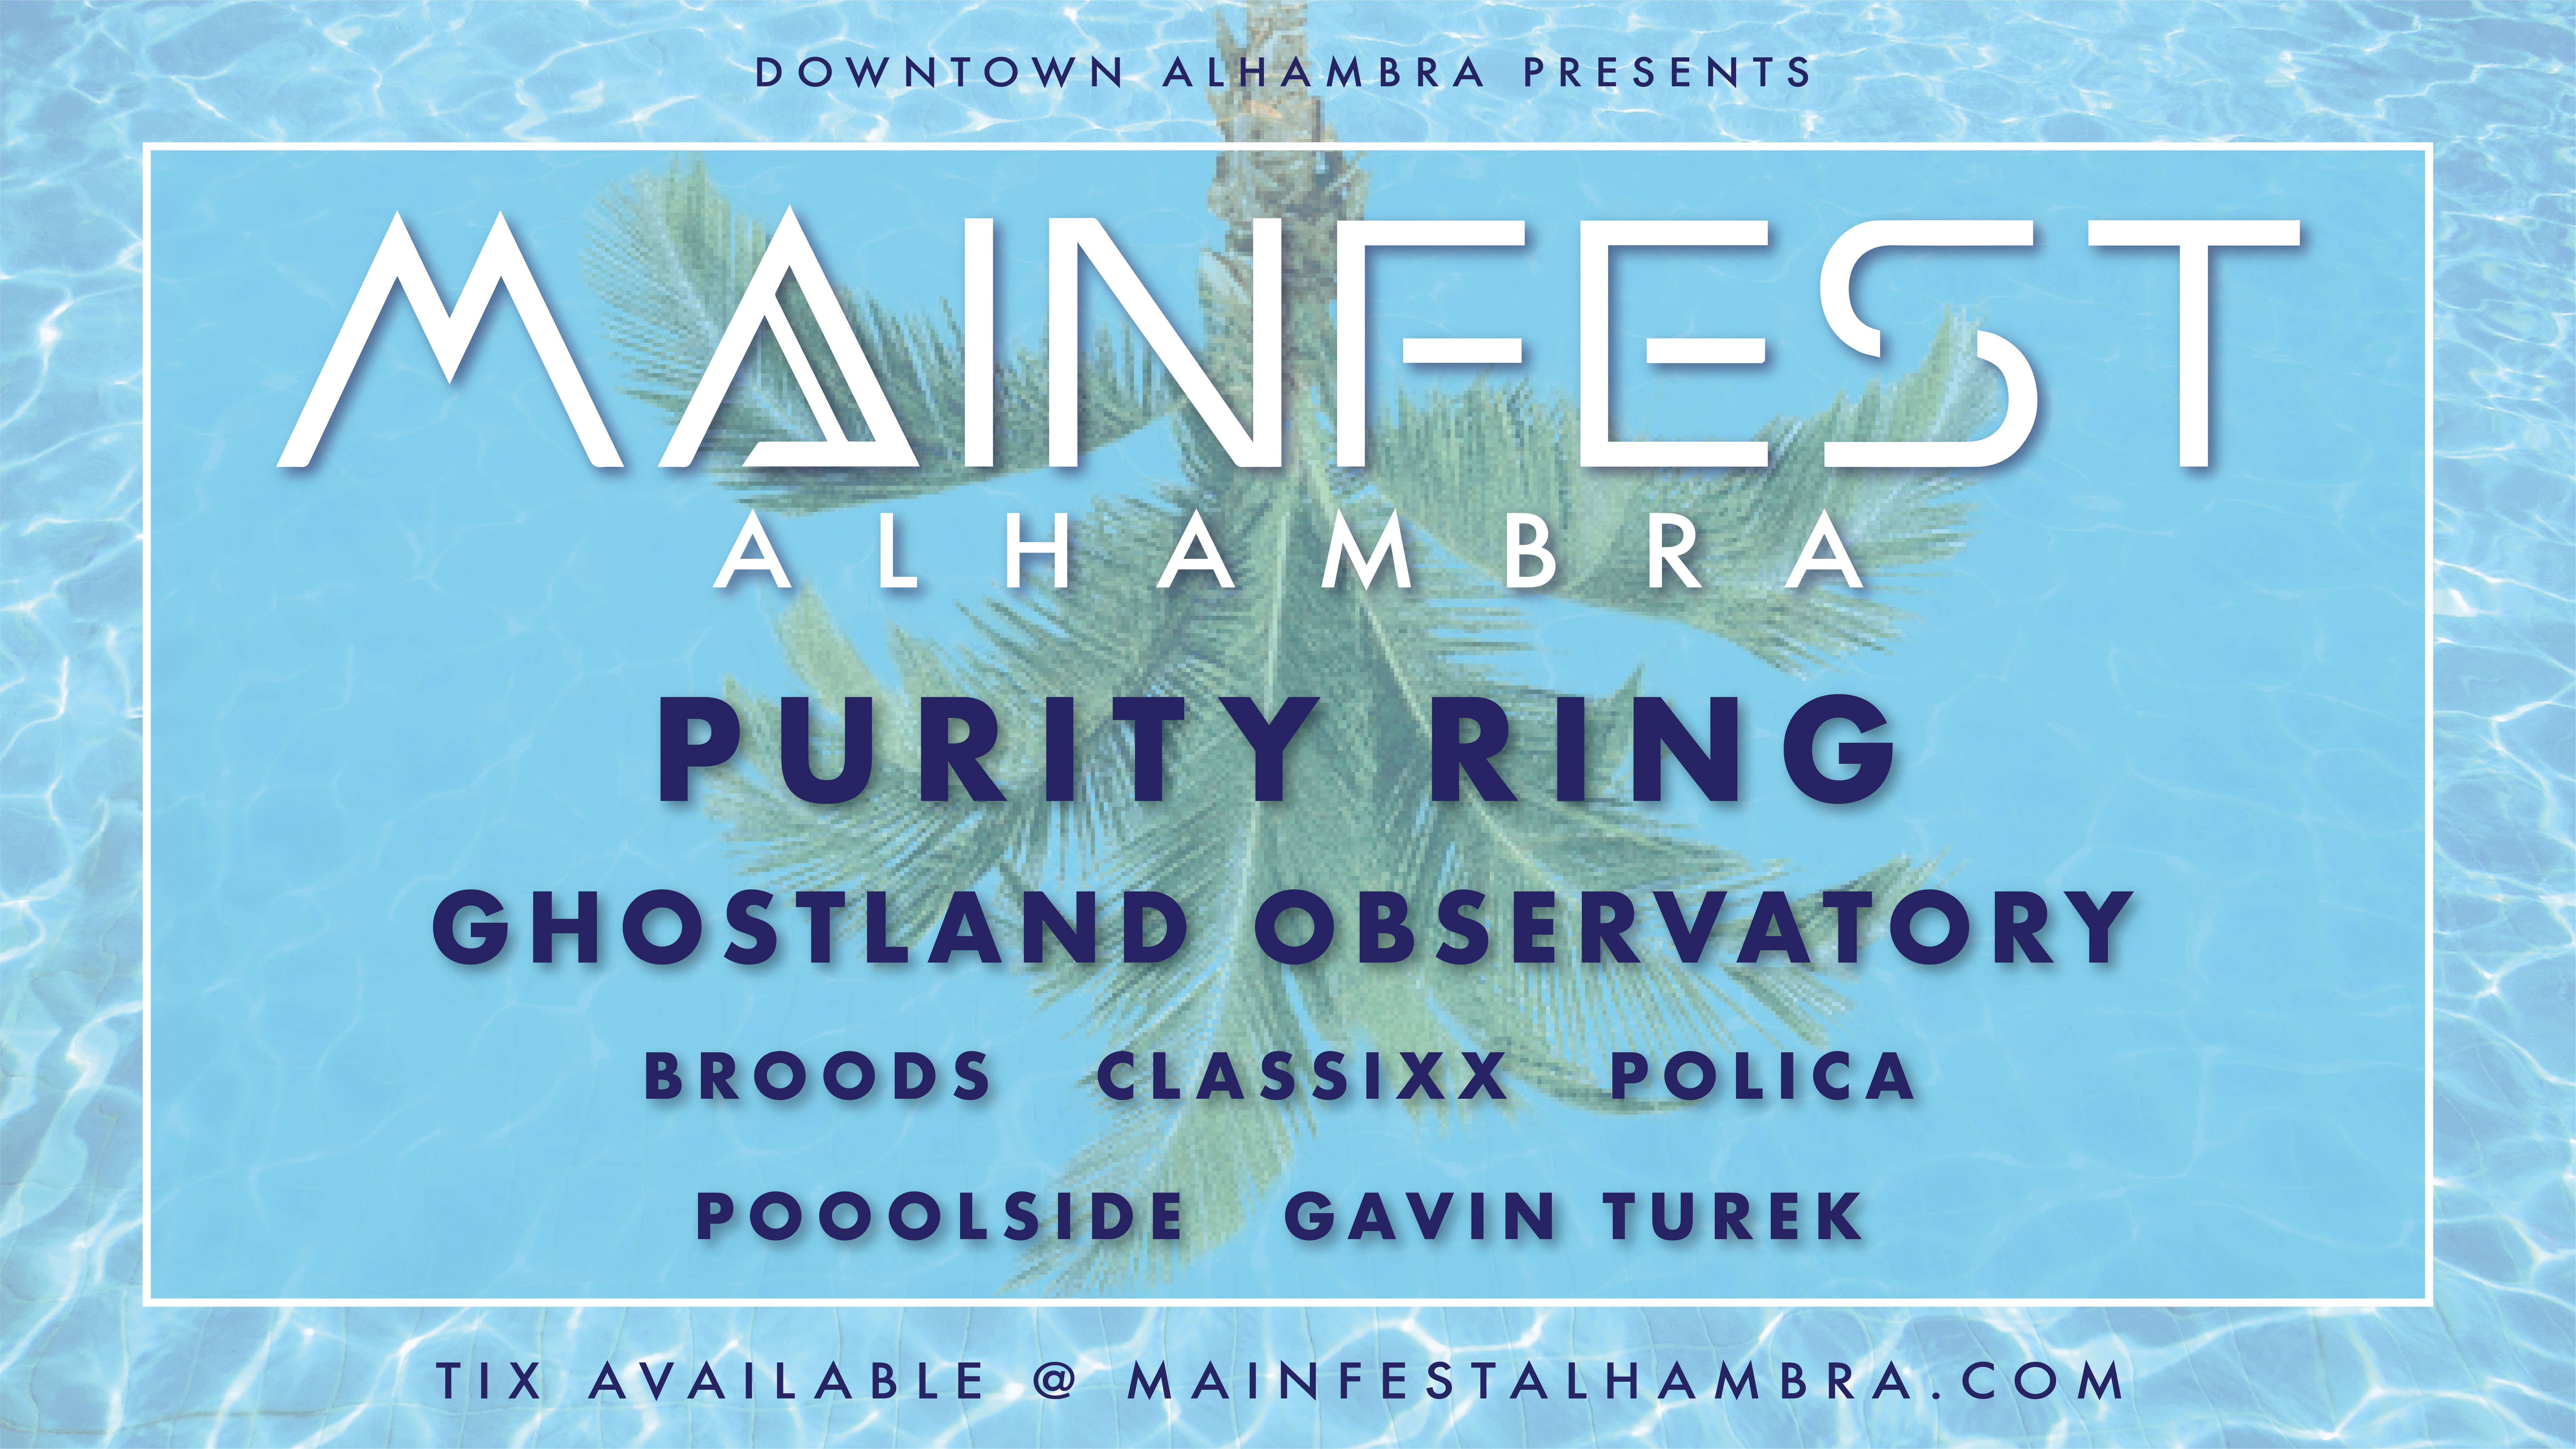 Mainfest Is Back For year 2 W/ Purity Ring, Broods, Classixx and More